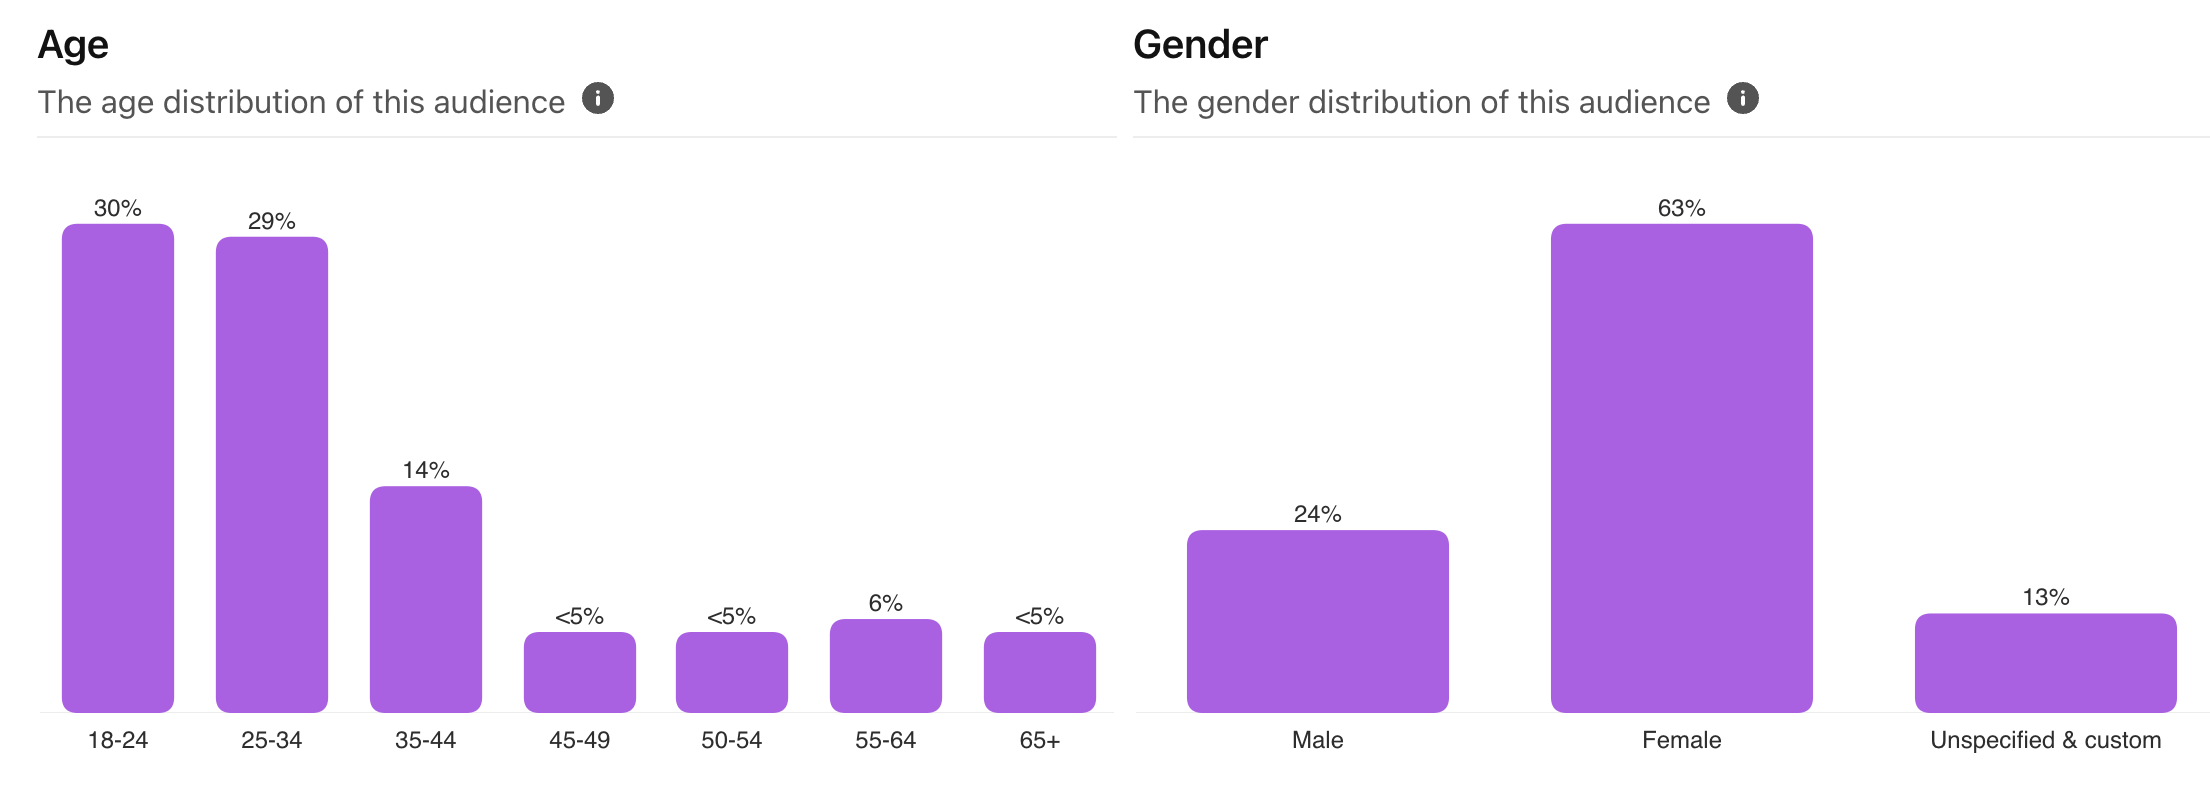 Age and gender demographics tables from Pinterest Pin with SPARK